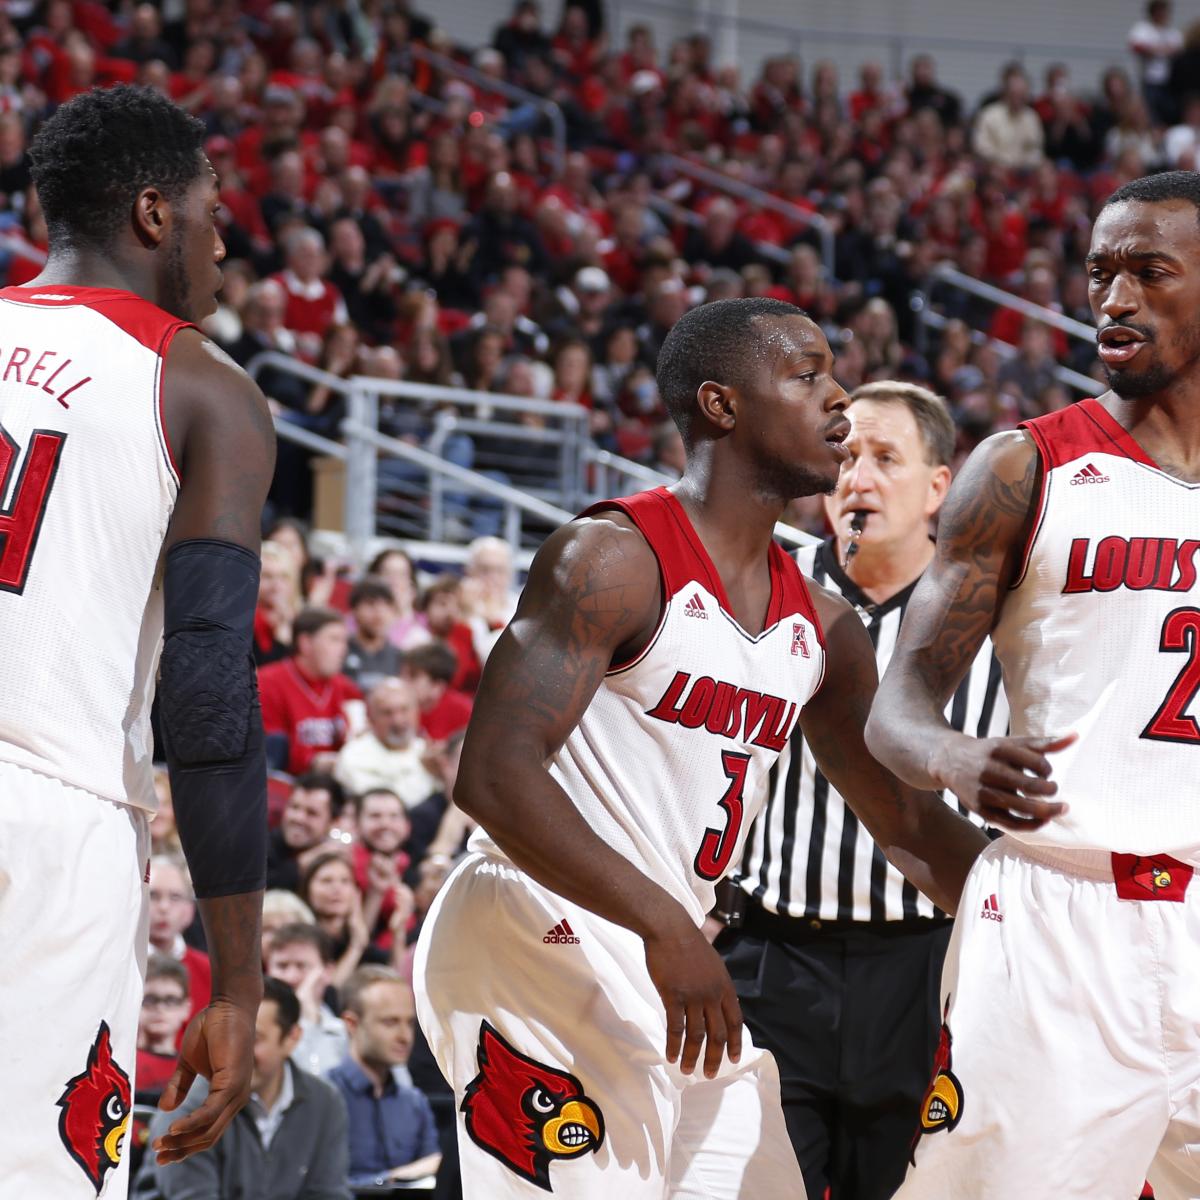 Louisville Cardinals vs. UCF Knights Live Blog: Instant Reaction and Analysis | Bleacher Report ...